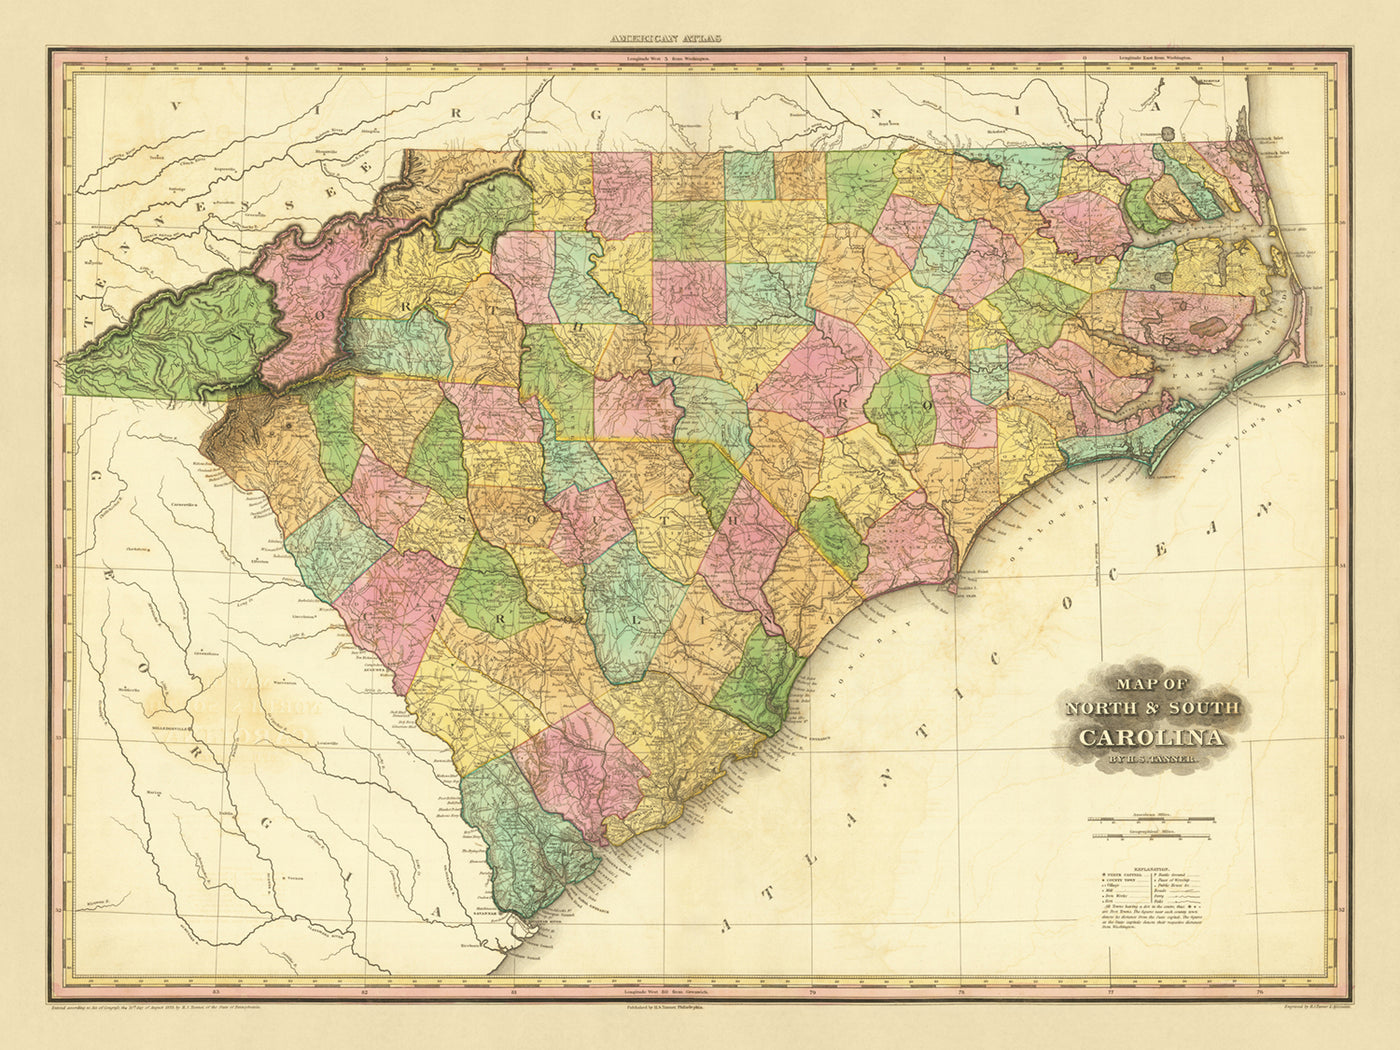 Old Map of North & South Carolina by Tanner, 1823: Charleston, Columbia, Charlotte, Raleigh, and Wilmington